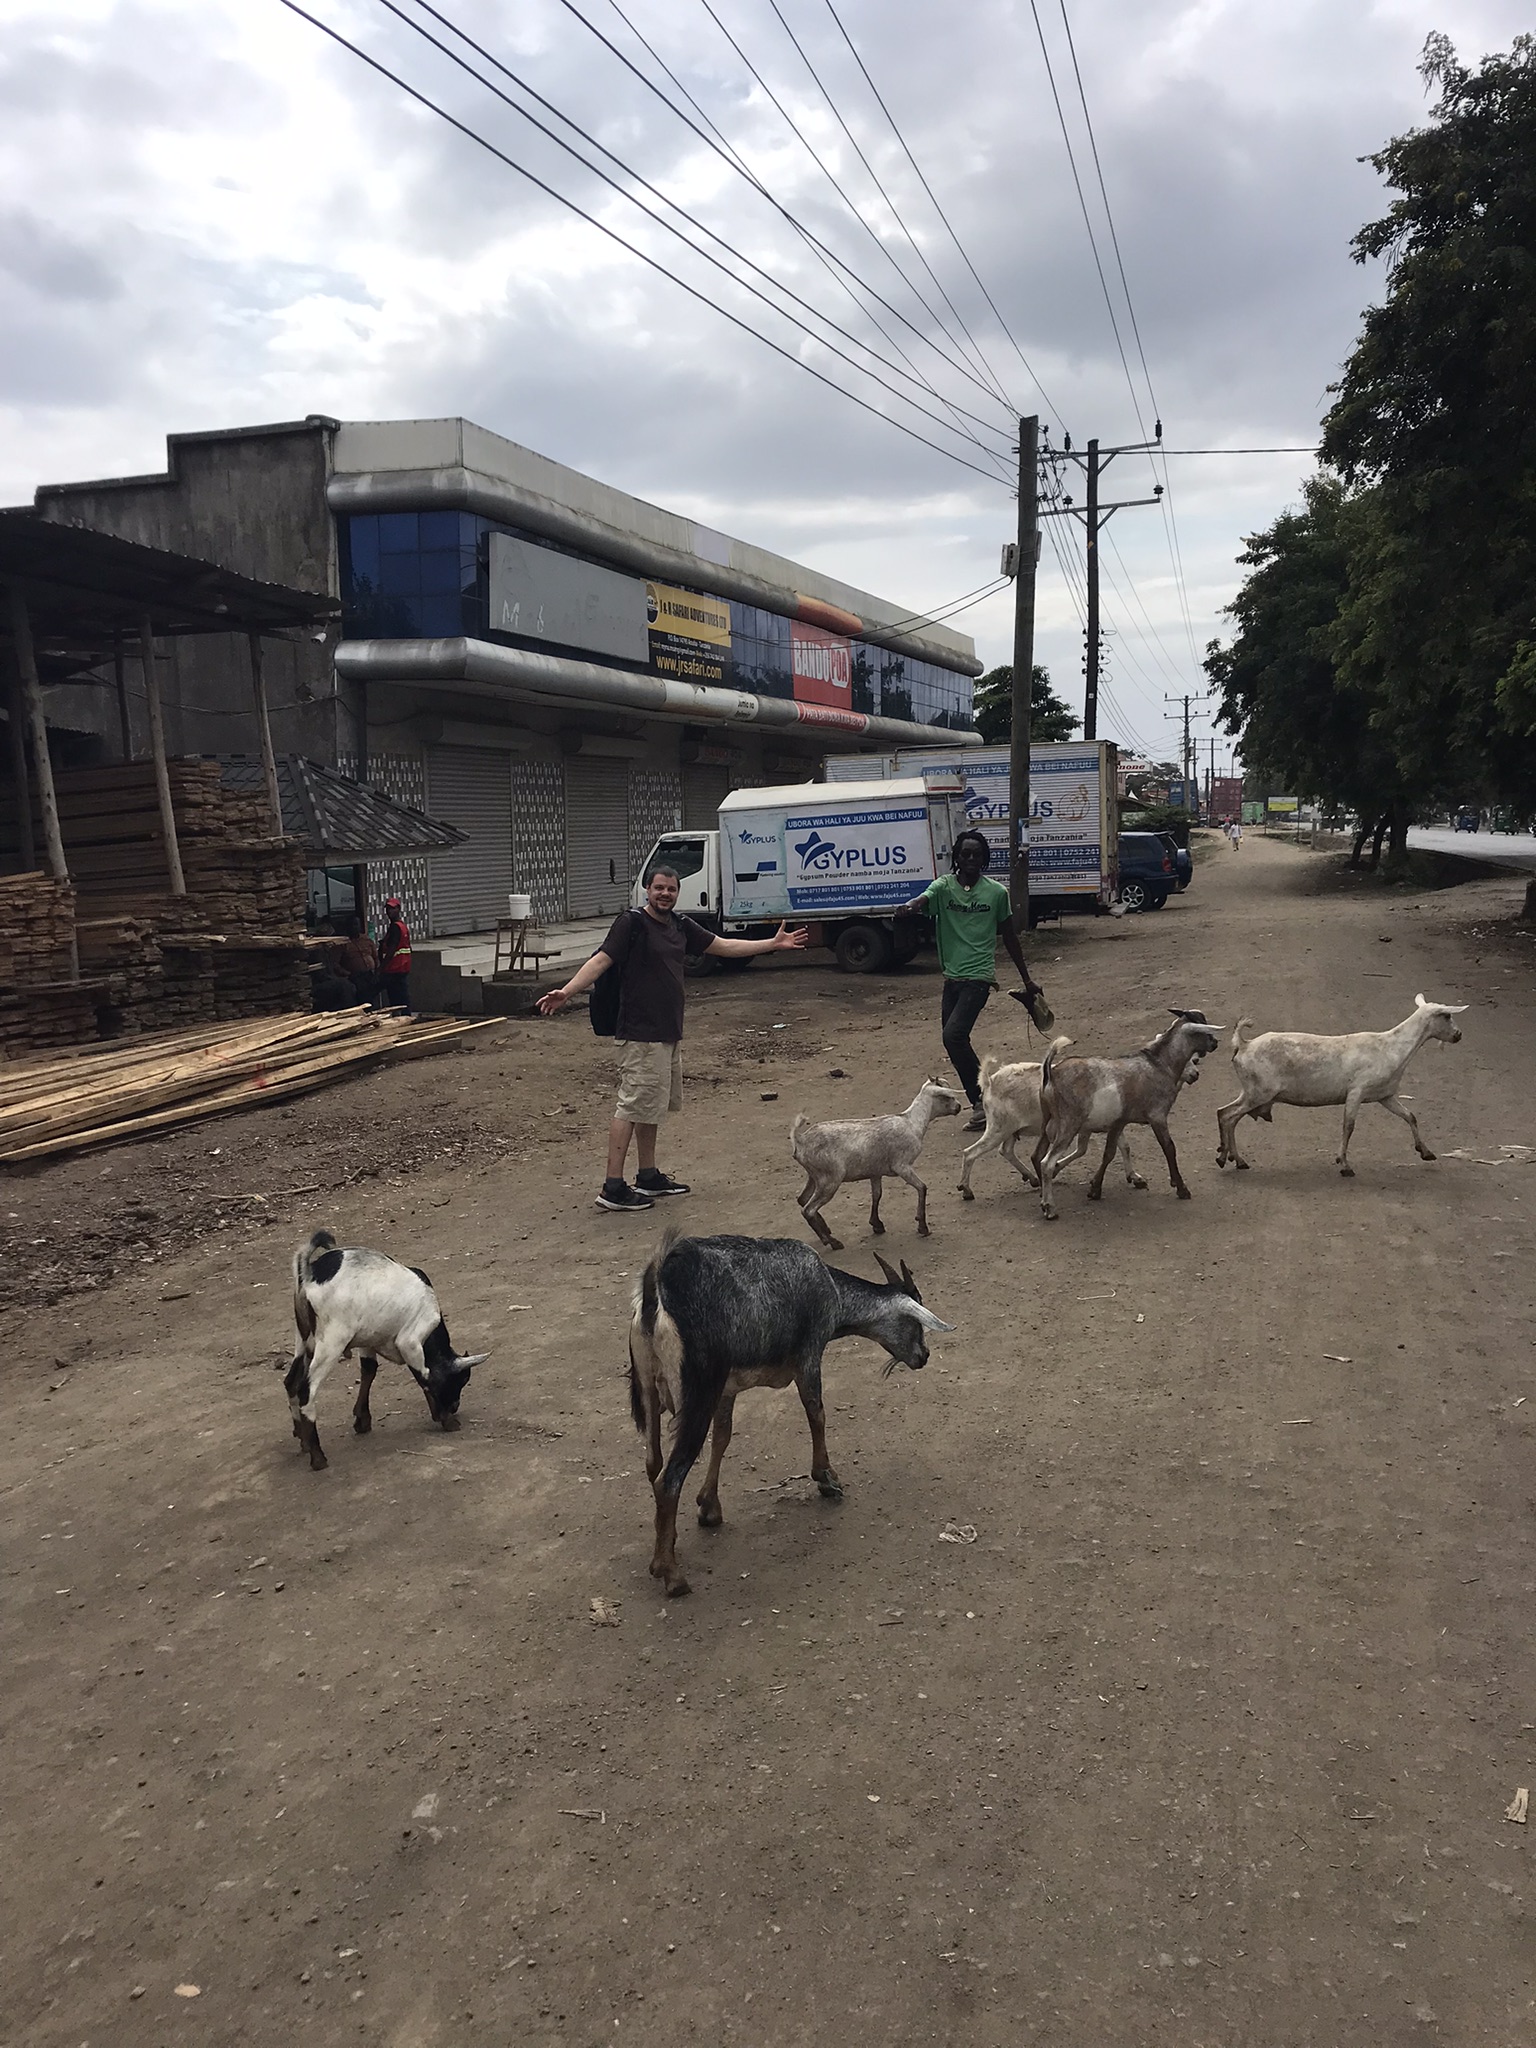 My roommate and local named John with goats on side of road